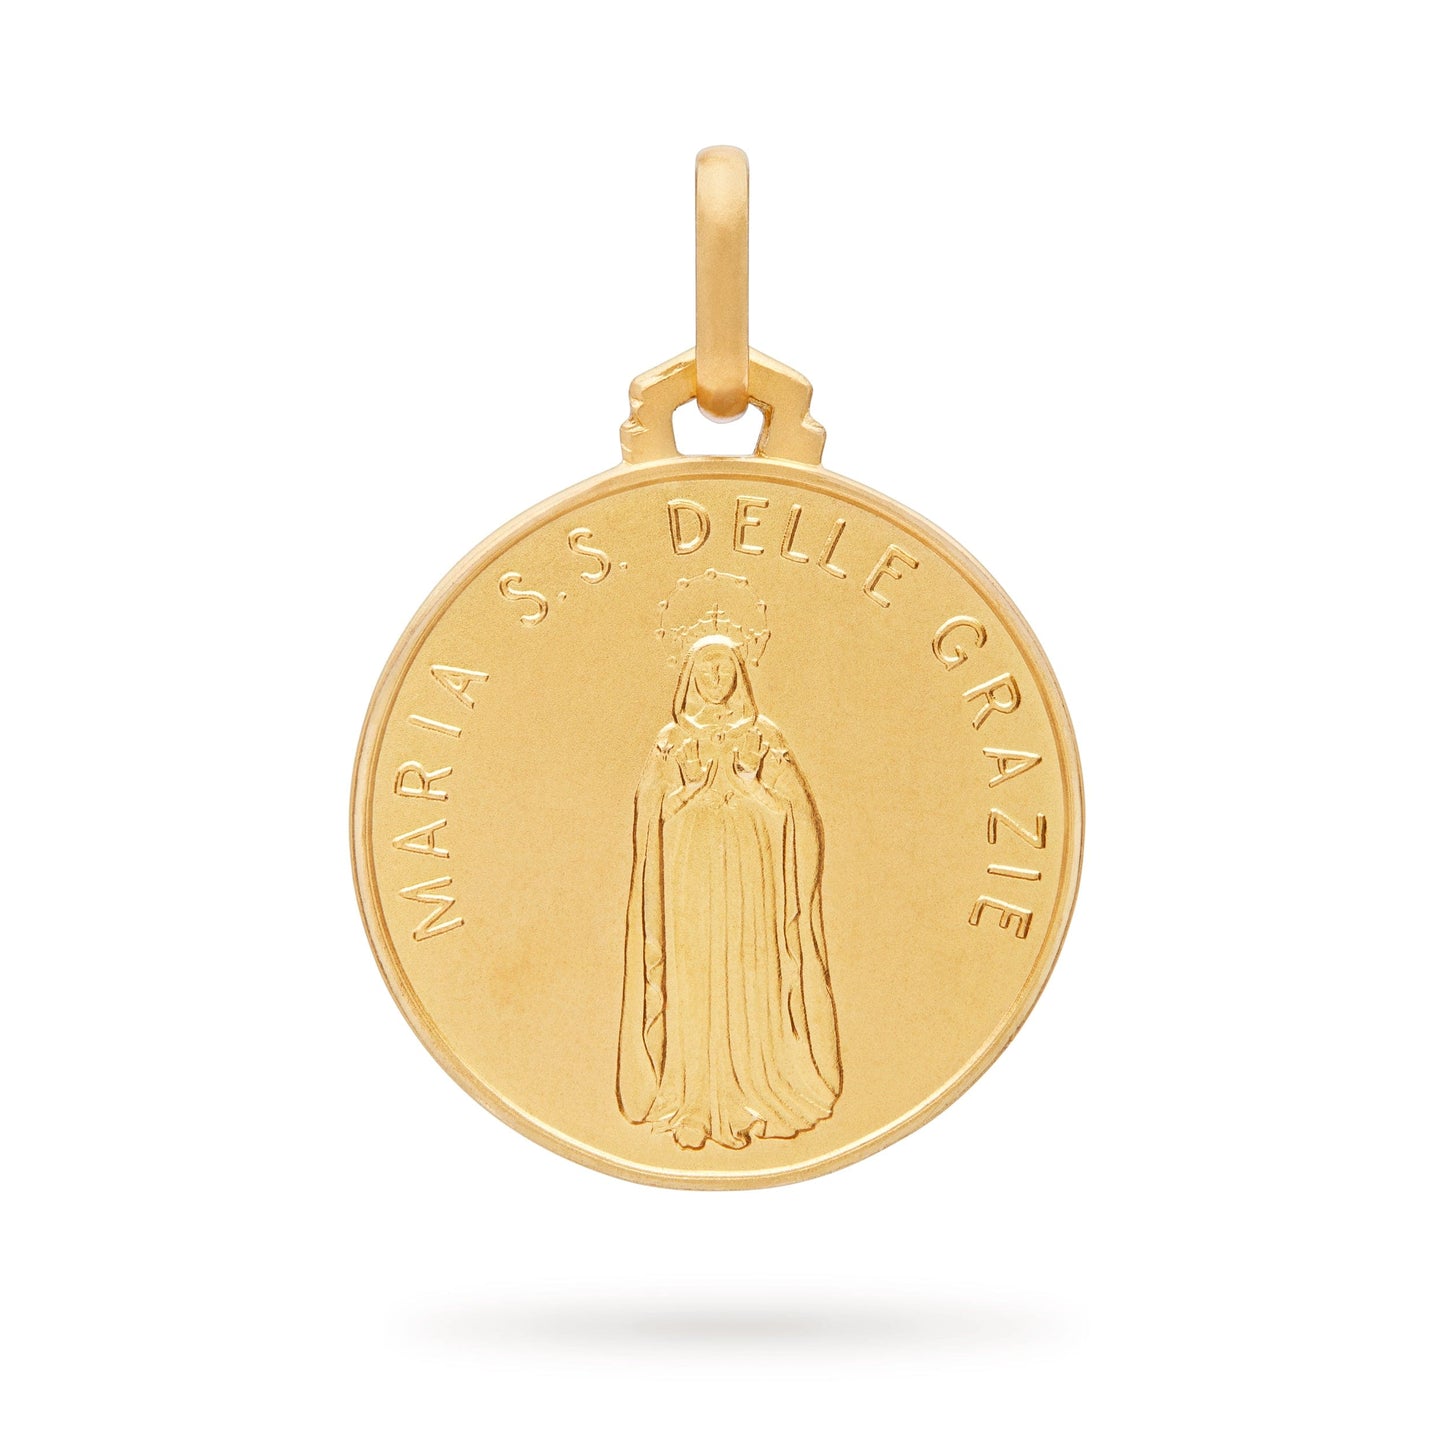 MONDO CATTOLICO 18 mm Our Lady of Graces Gold Medal